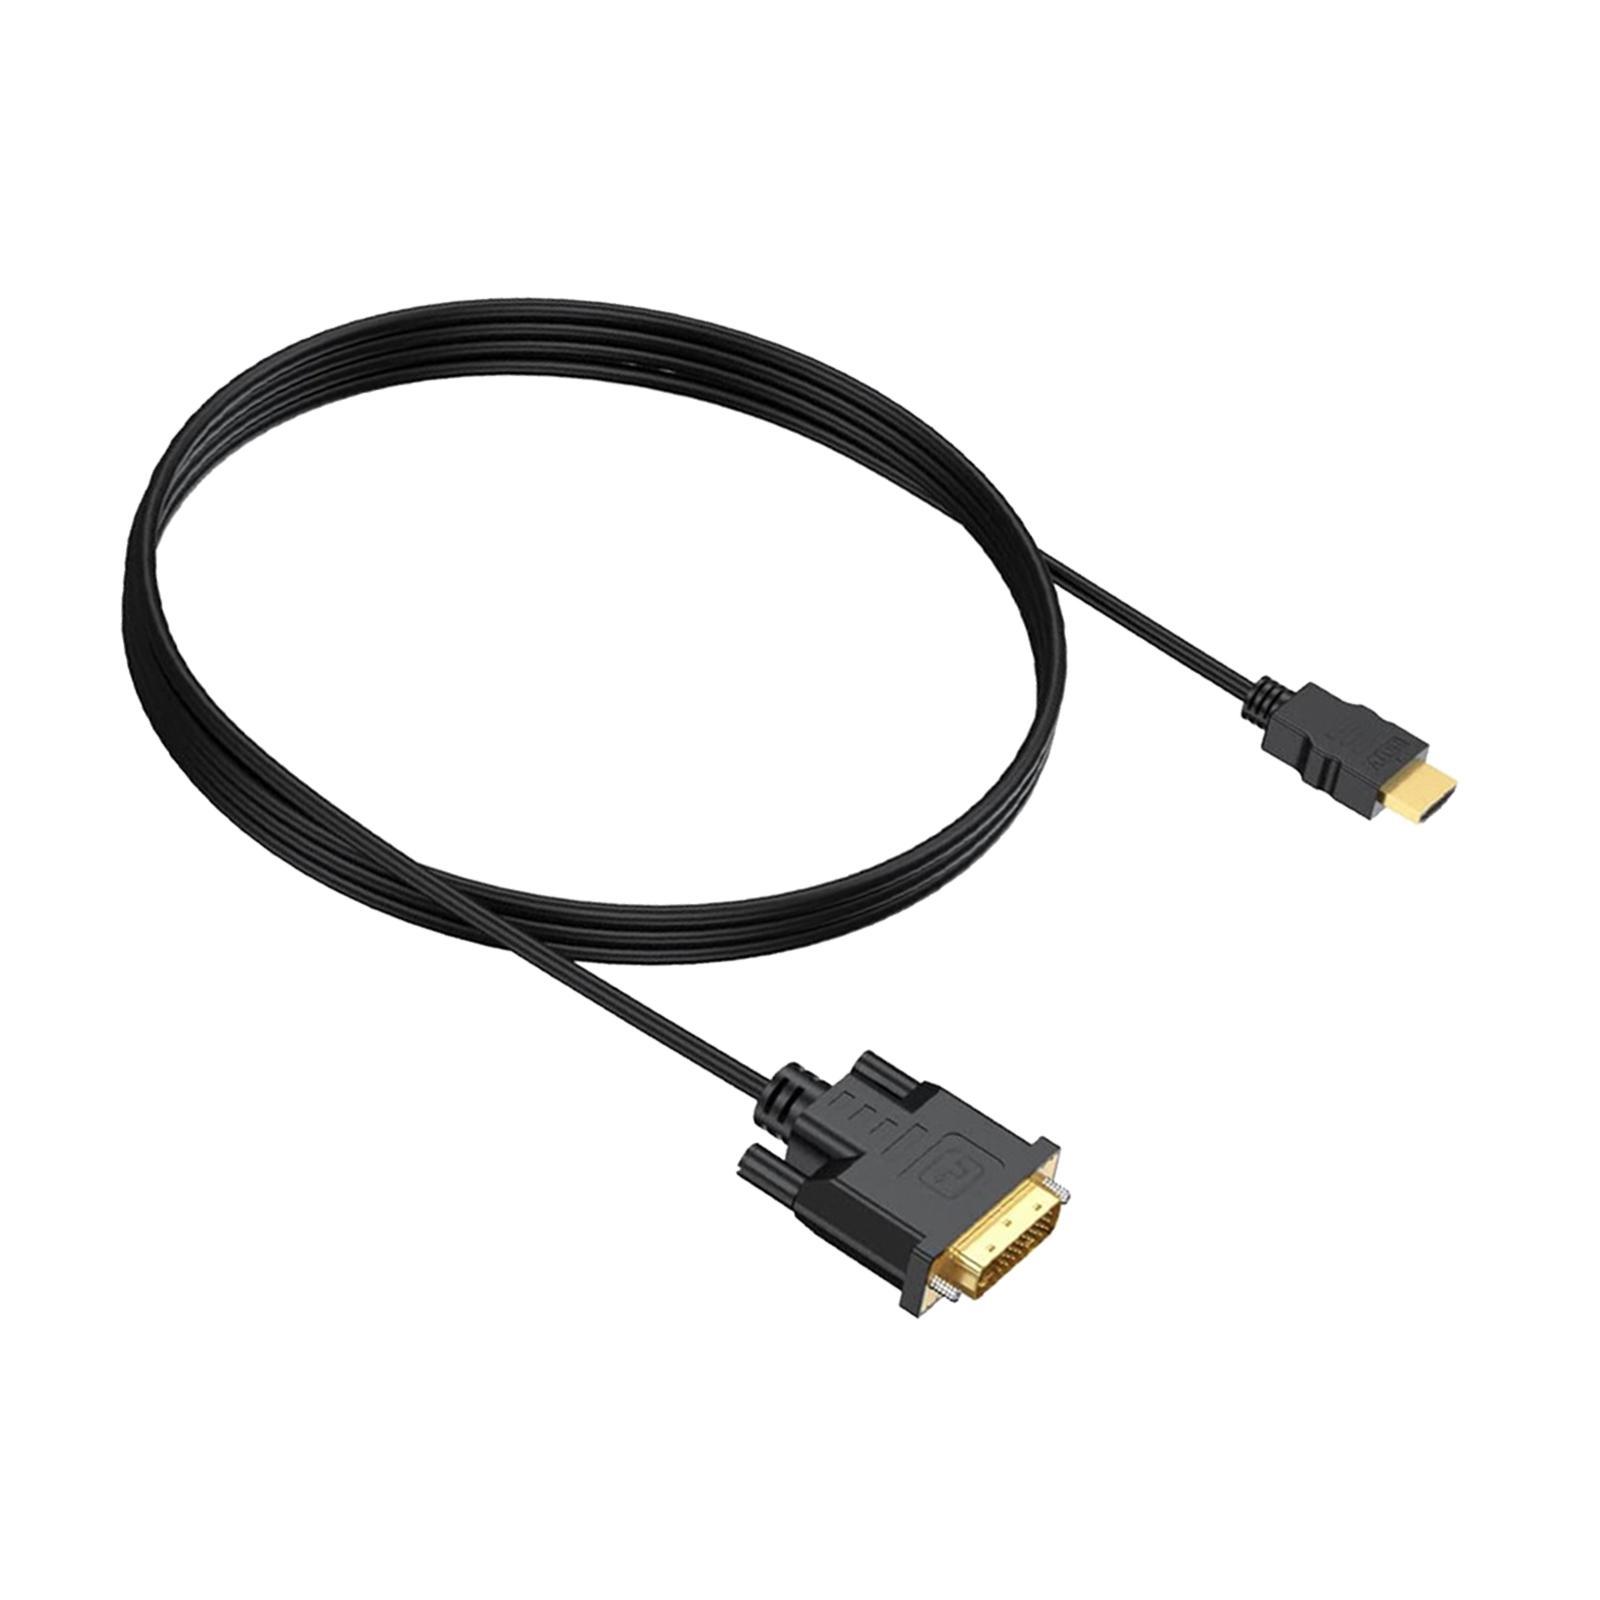 to Adapter Cable Male to -D Male for Desktops TV Monitors